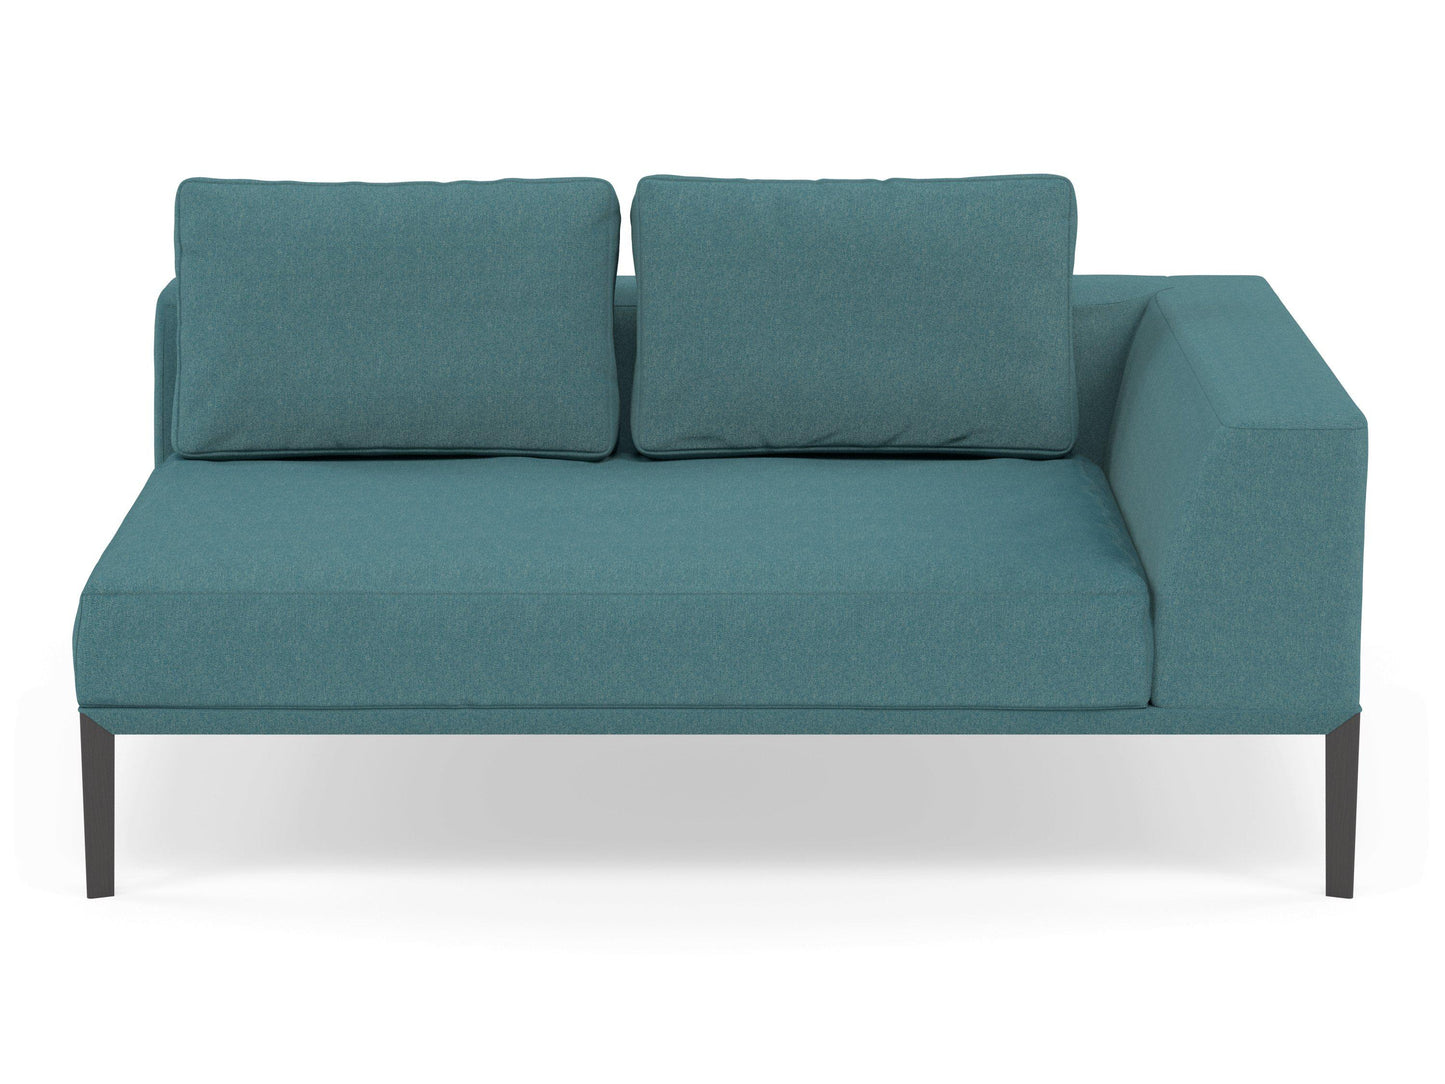 Modern 2 Seater Chaise Lounge Style Sofa with Left Armrest in Teal Blue Fabric-Wenge Oak-Distinct Designs (London) Ltd